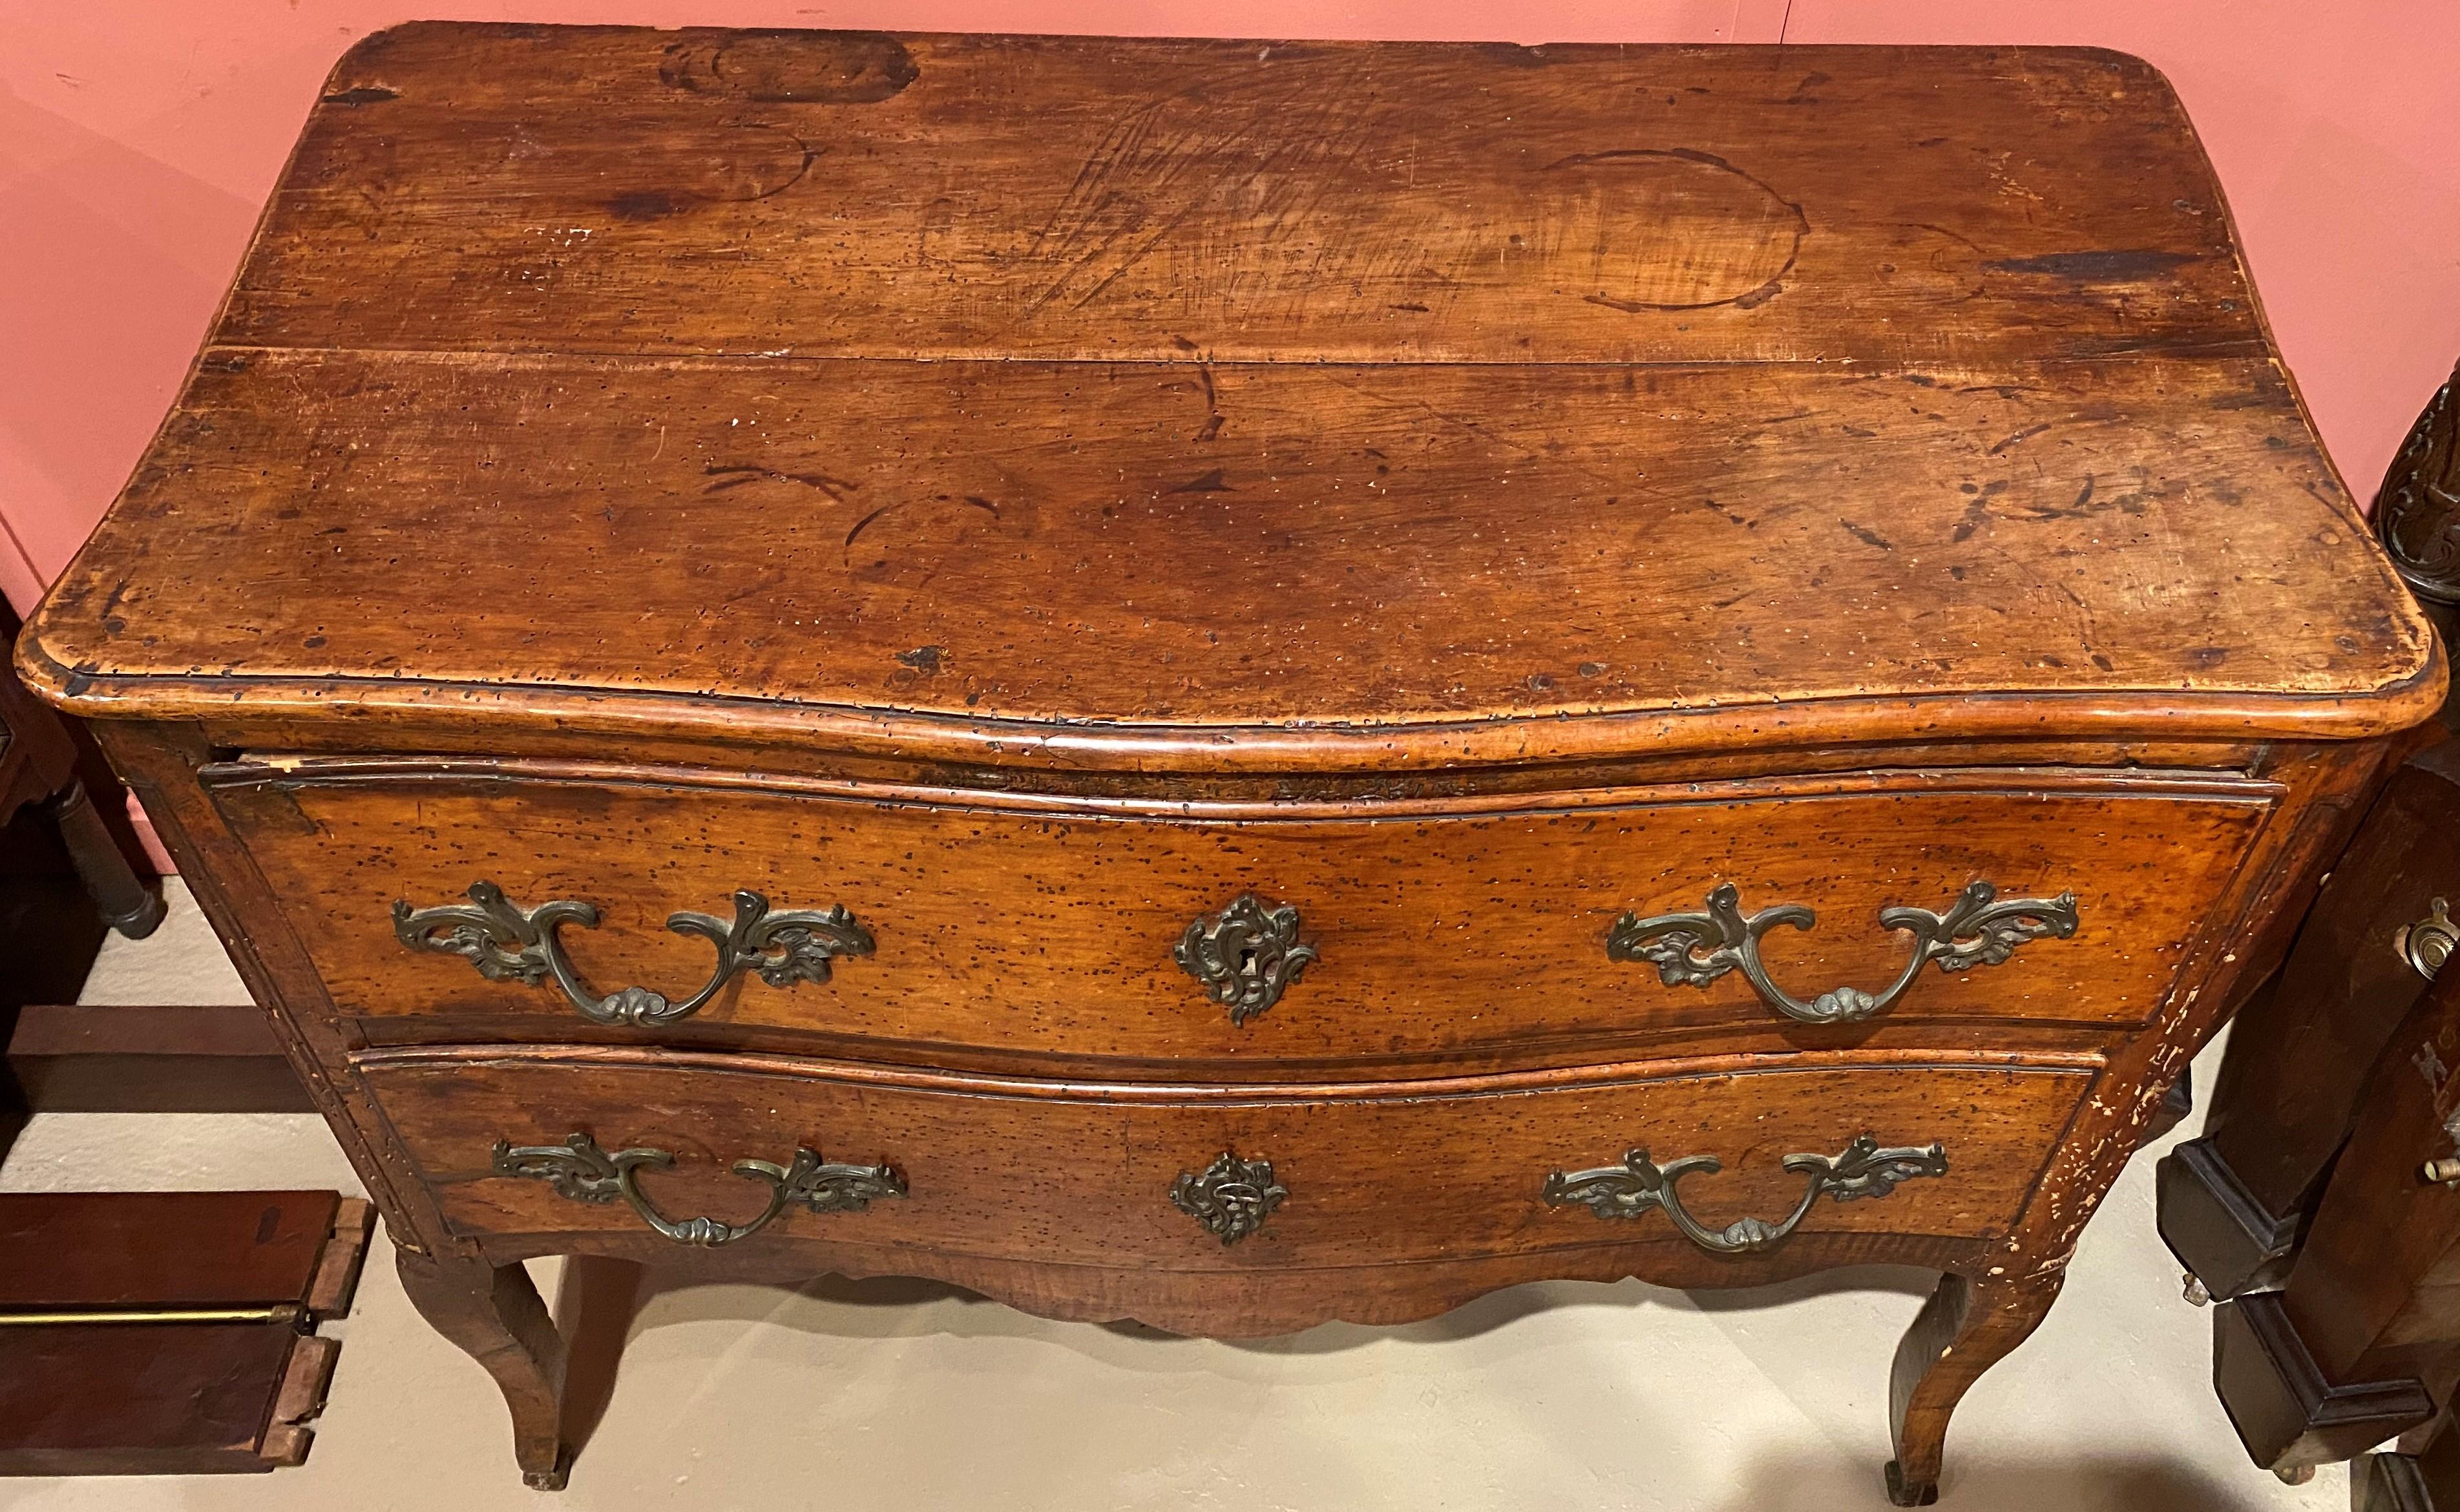 A fine Italian, probably Venetian walnut two drawer commode with a subtle serpentine front, conforming molded edge top, foliate period brasses, nicely shaped skirt, and great patina. The commode dates to the 18th century and is in good overall